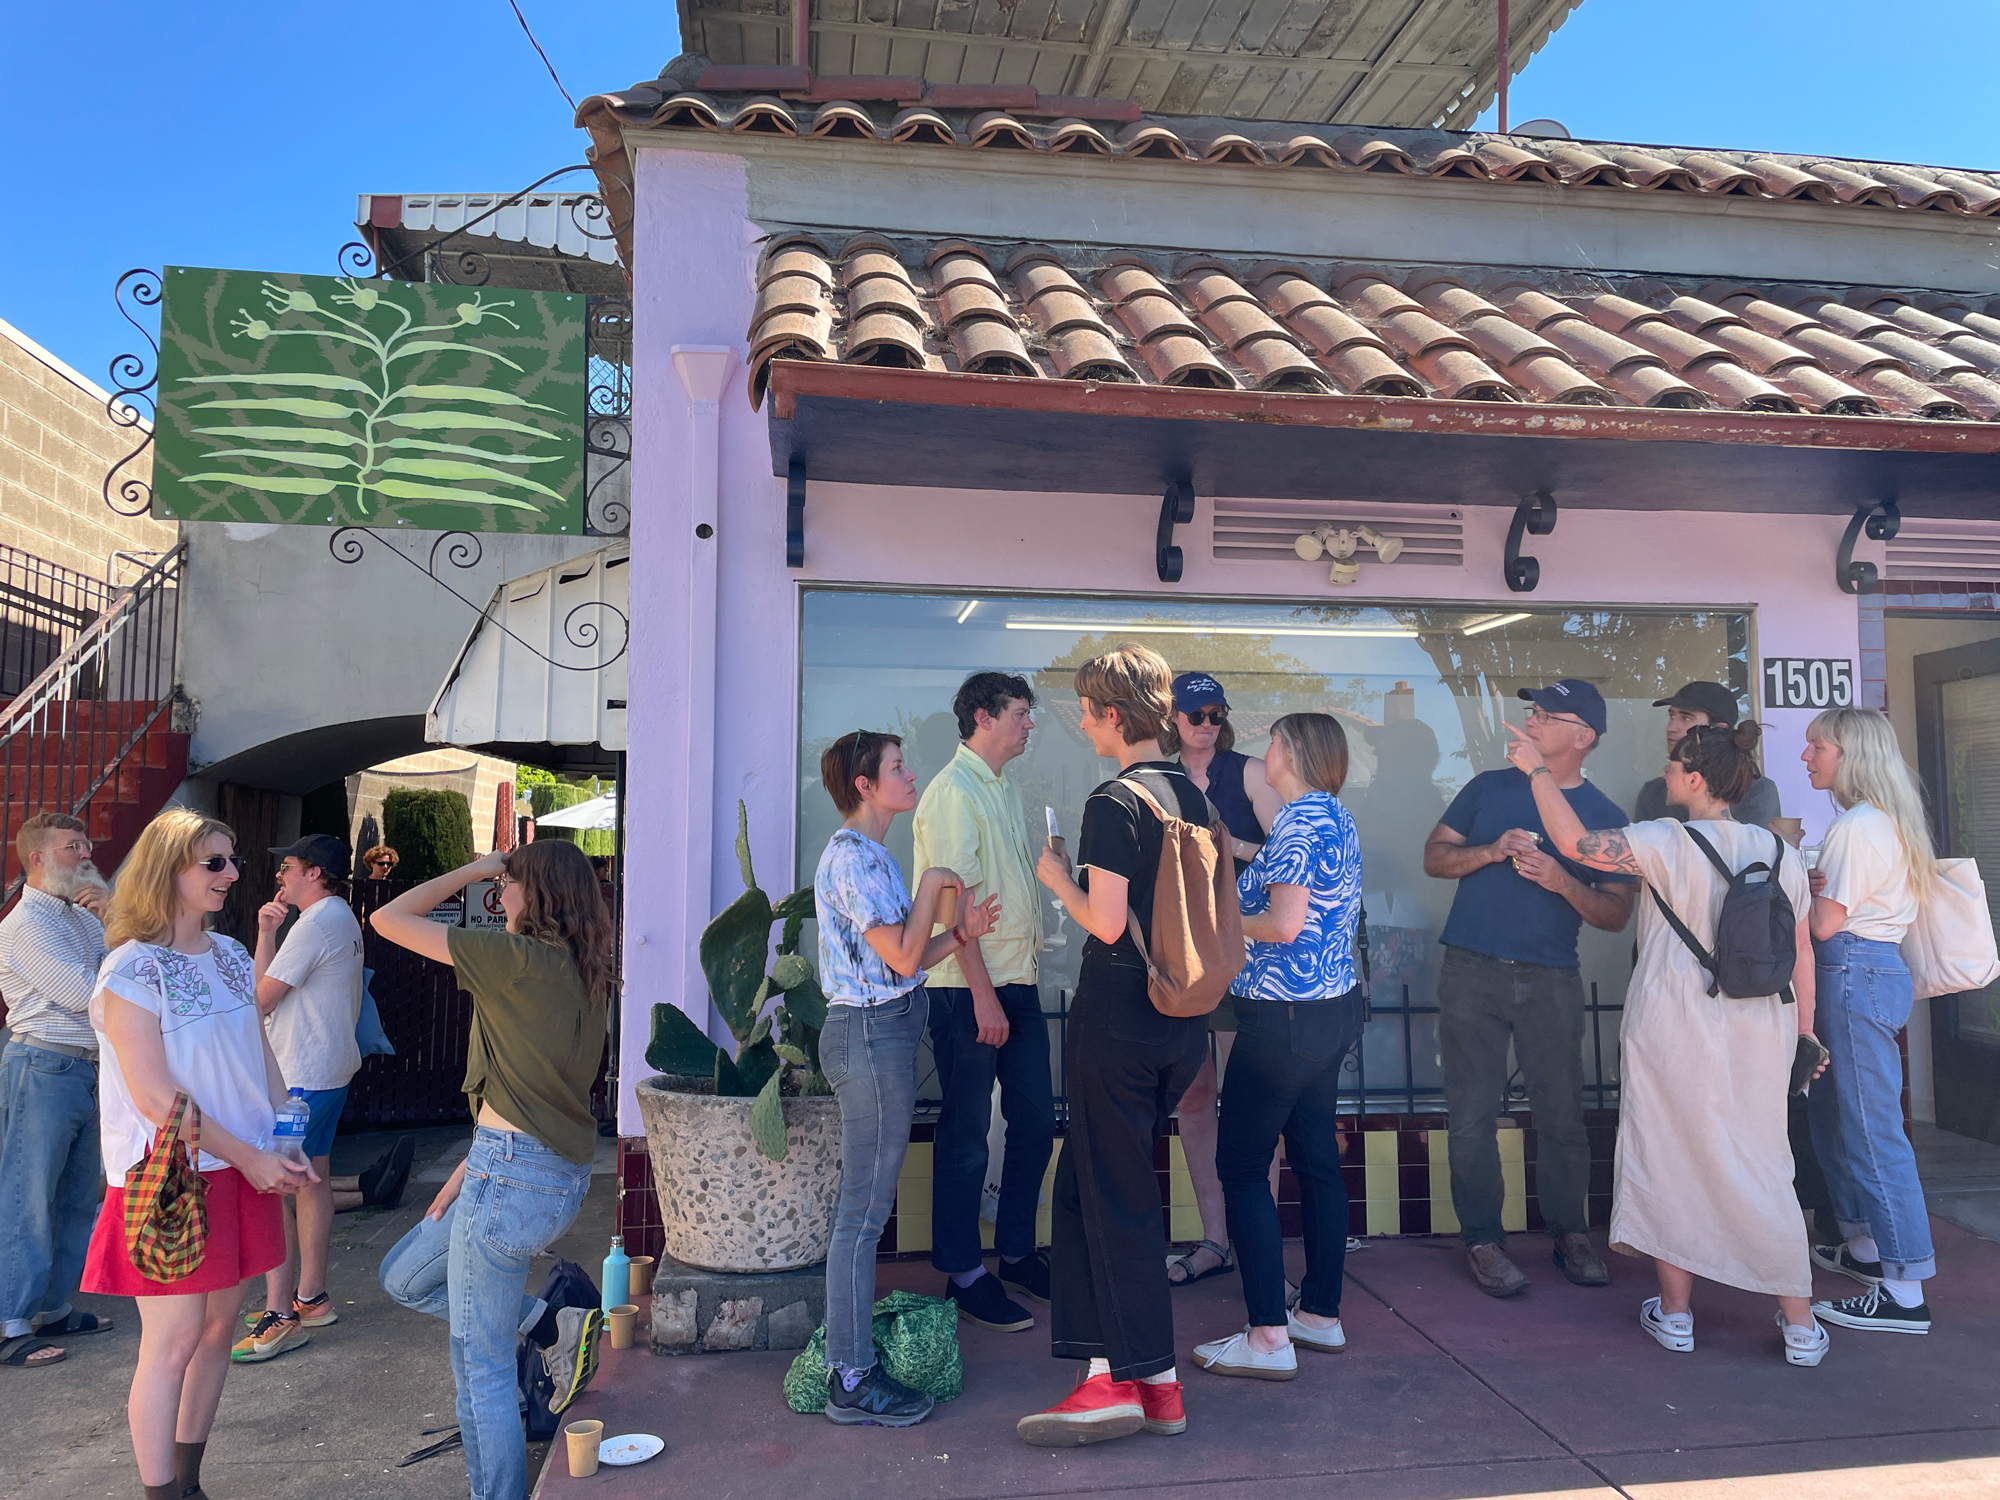 A crowd outside of a tile-roofed storefront on a sunny day